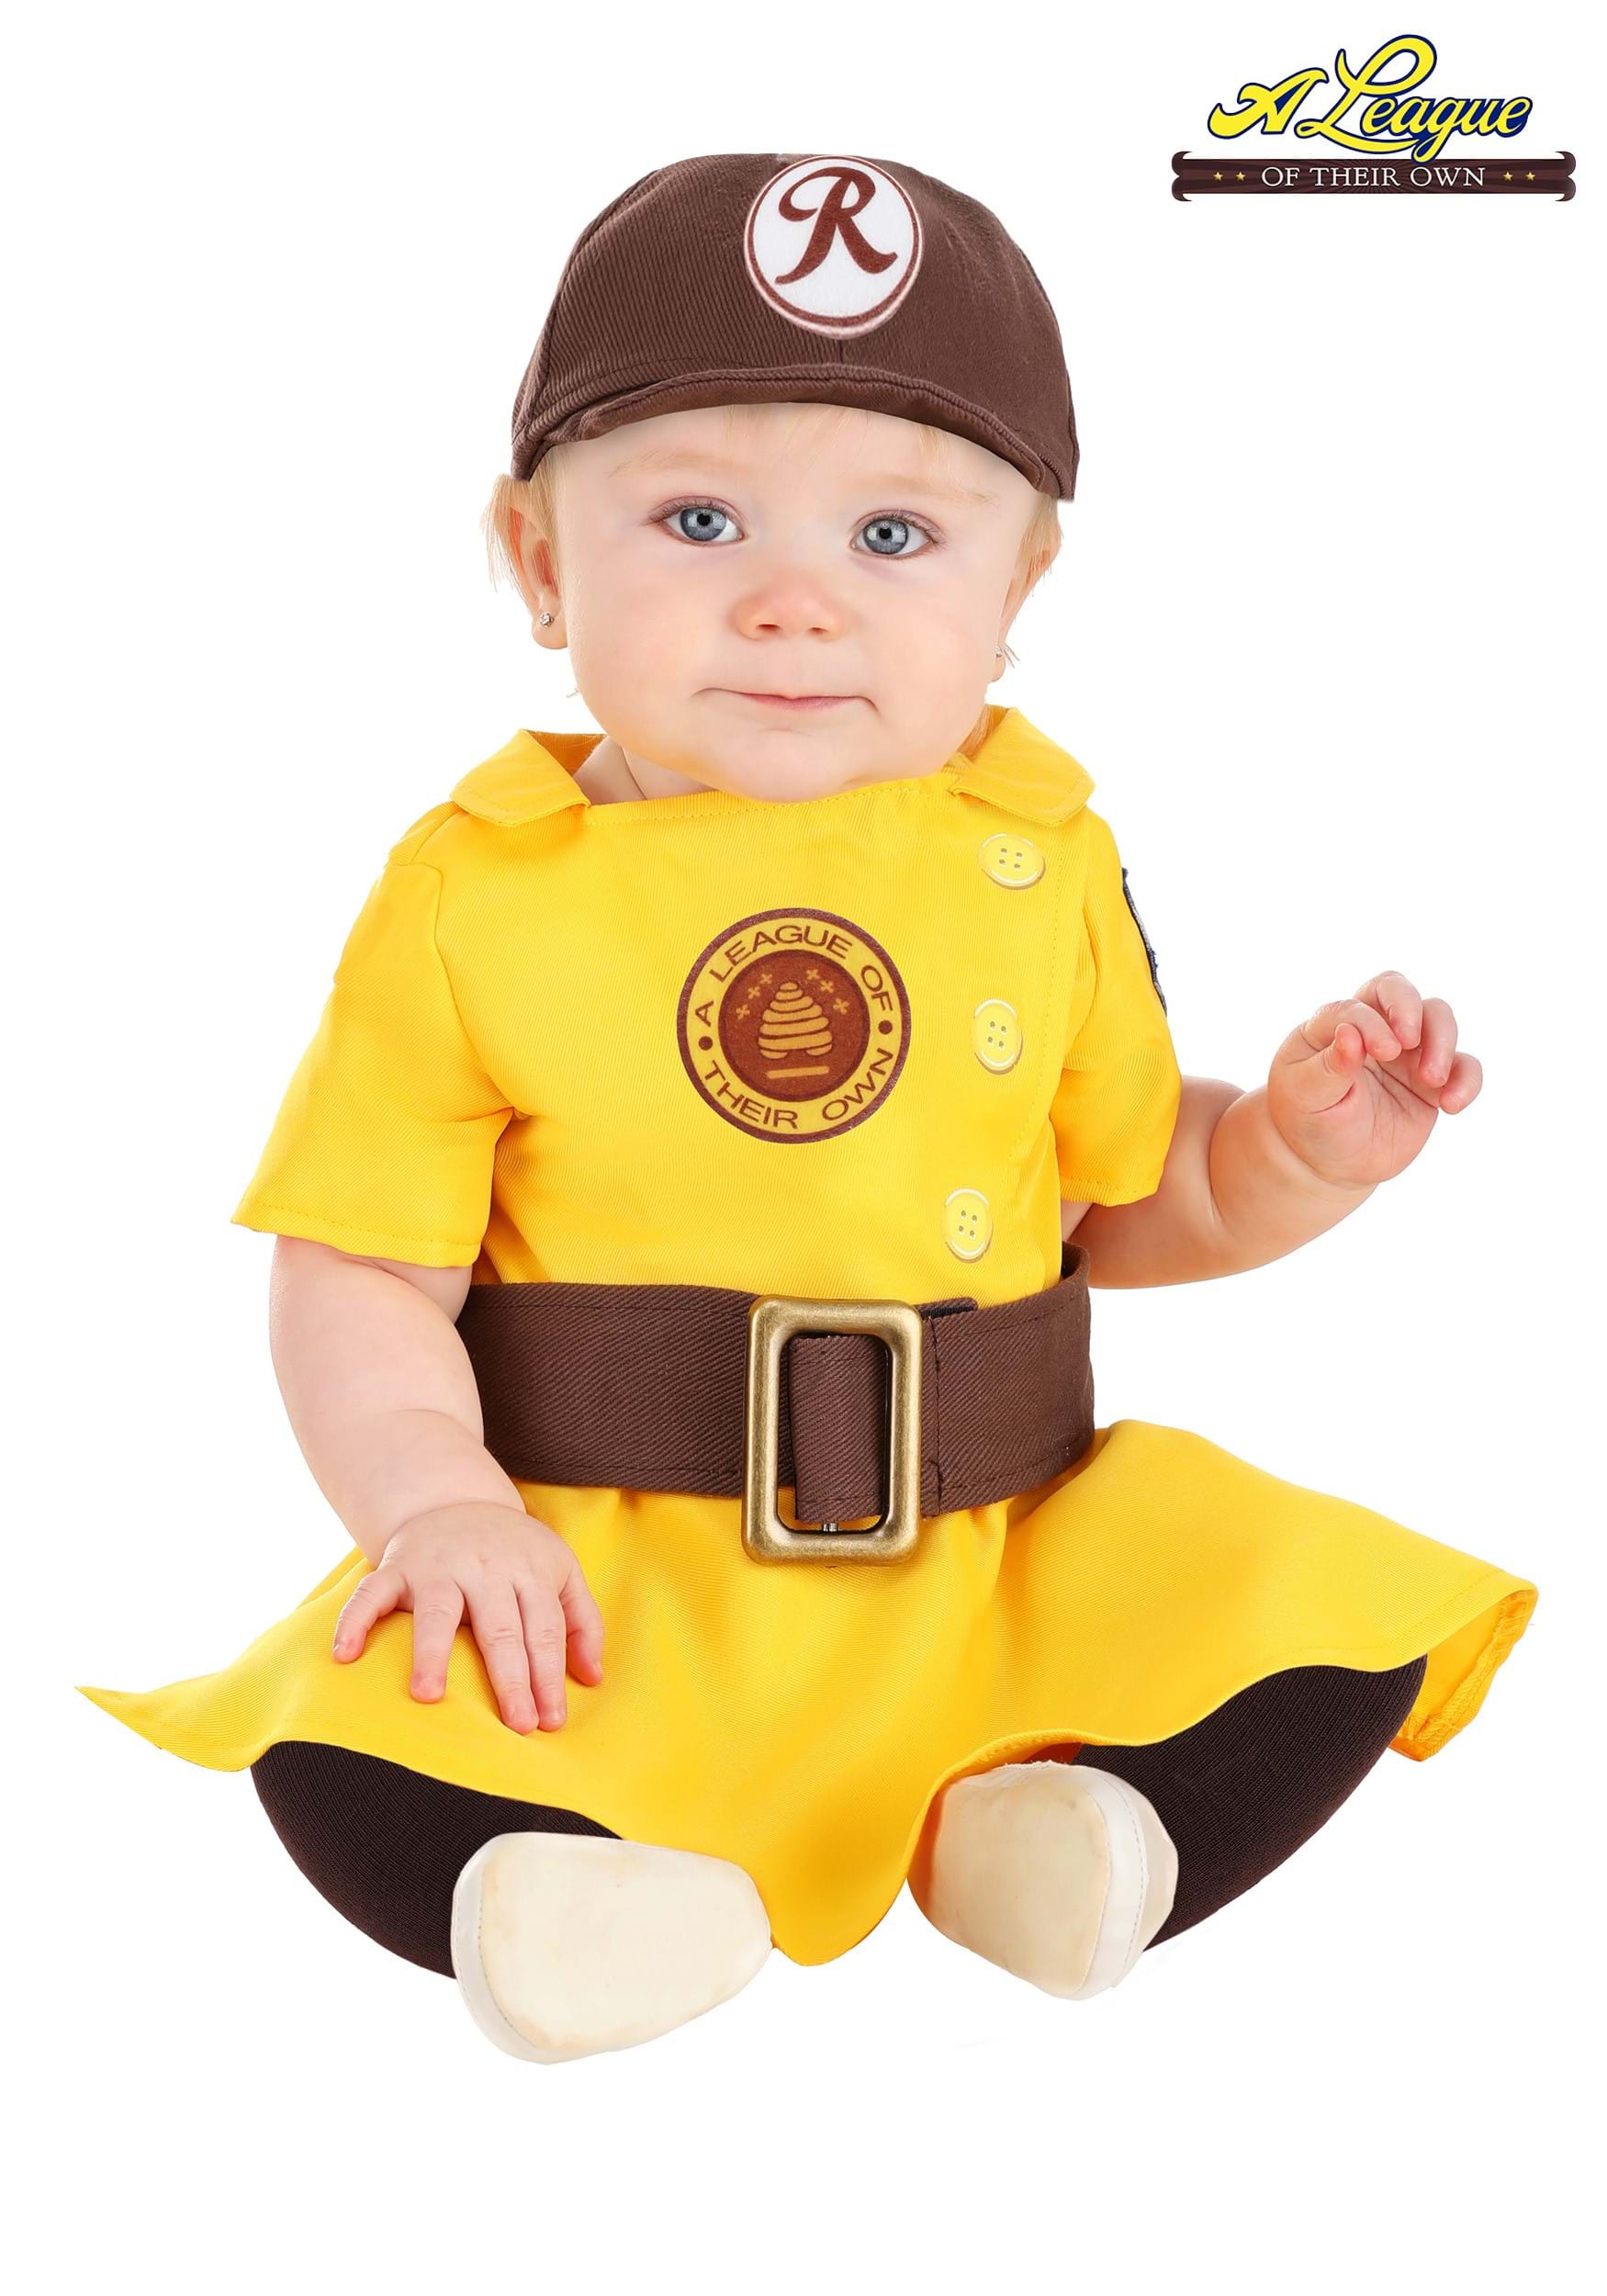 League of Their Own Baseball Uniform With Red Trim Sizes 2T 